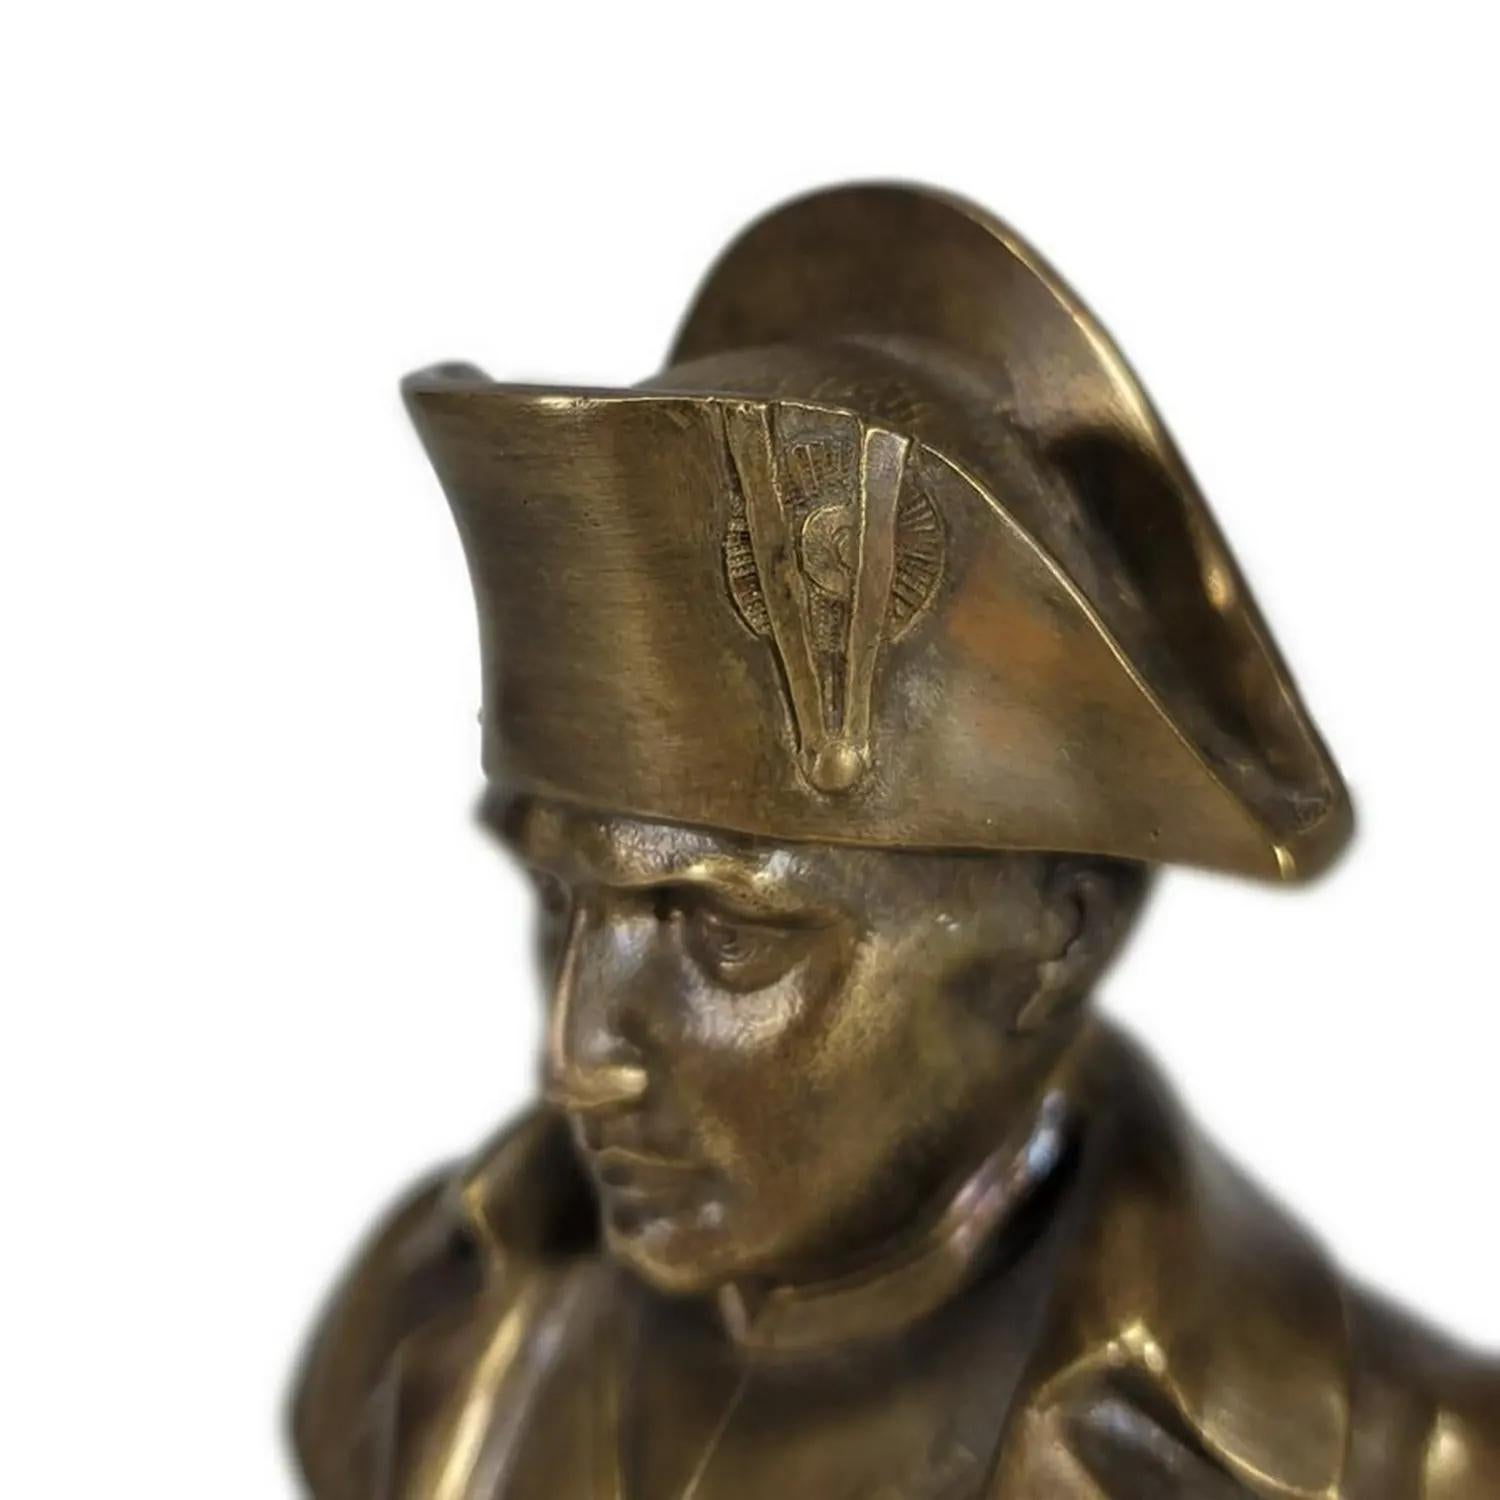 A 19th century, gold antique French bust of Napoleon Bonaparte made of hand crafted bronze and marble, in good condition. The detailed Parisian décor piece represents the First French Empire time period, era also known as Napoleonic France. Wear